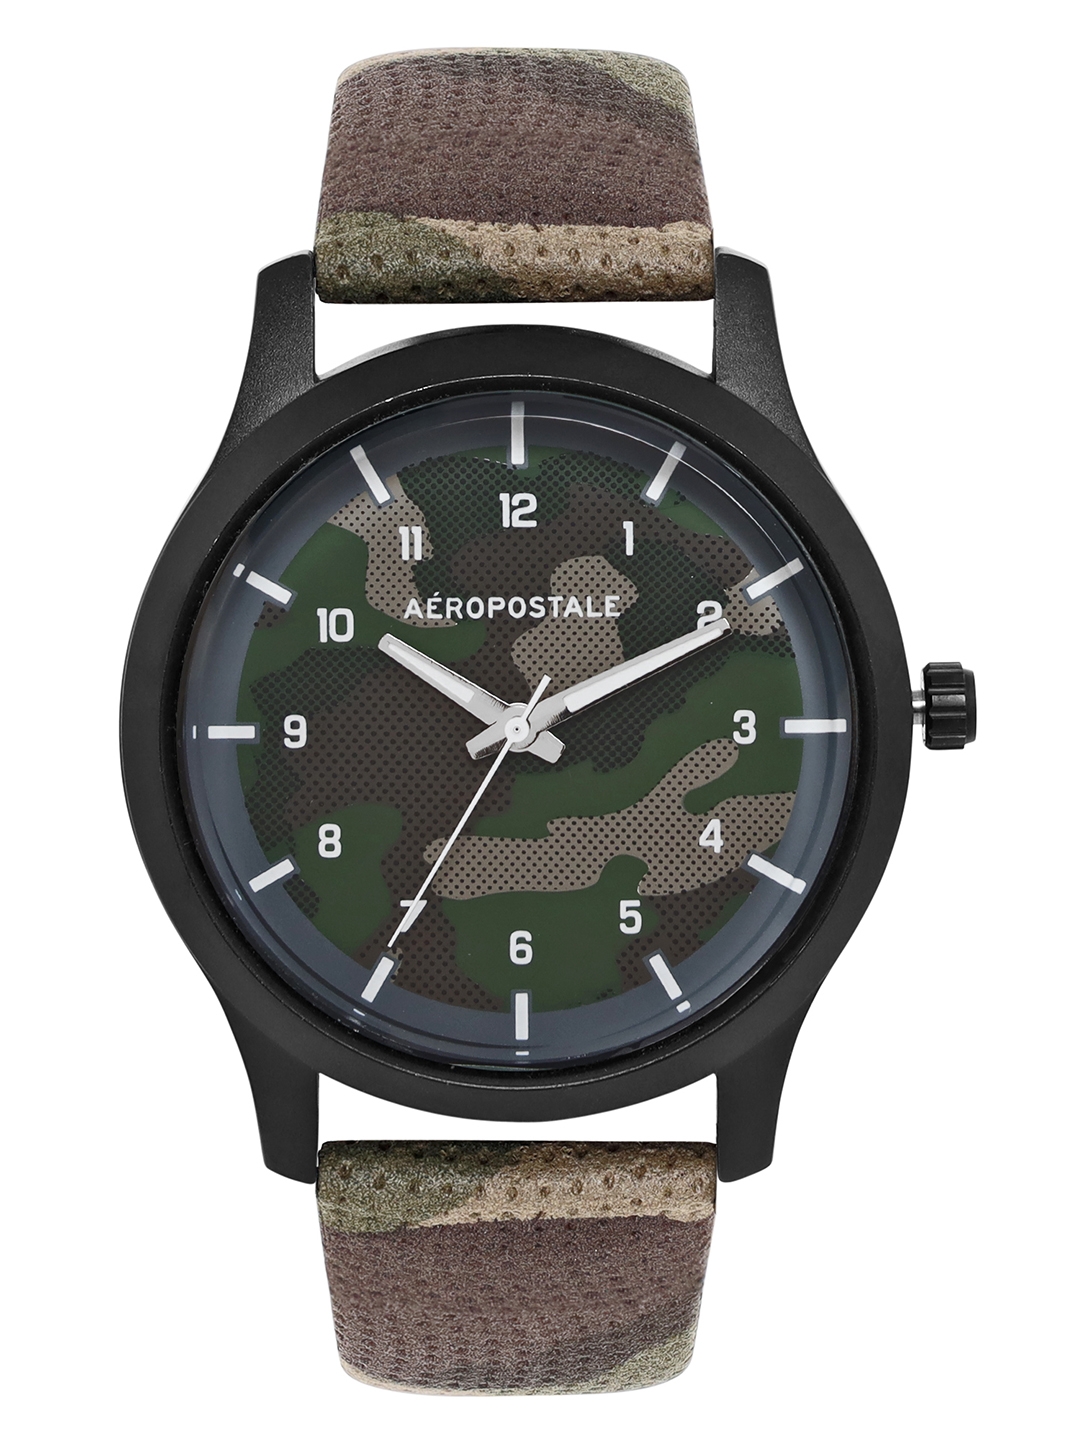 Aeropostale "AERO_AW_A7-1_GRN" Classic Men’s Analog Quartz Wrist Watch, Black Metal Alloy case, Classic Green camouflage Dial with contrasting white hand, Leather  wrist Band  Water resistant 3.0 ATM.